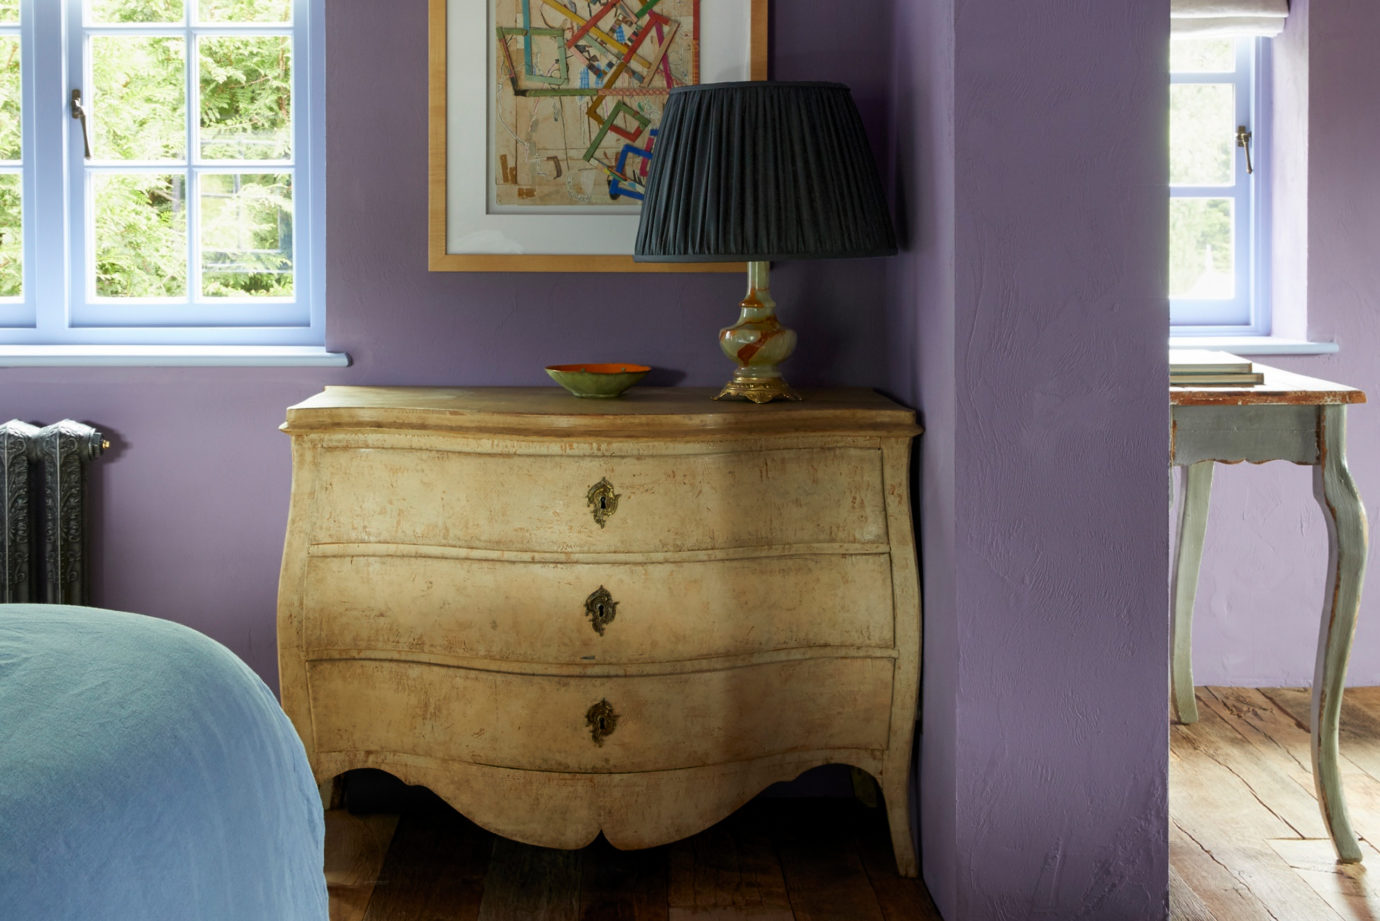 An antique chest of drawers from Augustus Brandt is perfectly imperfect in a Grade II listed bedroom interior design by Surrey interior designer Ana Engelhorn.